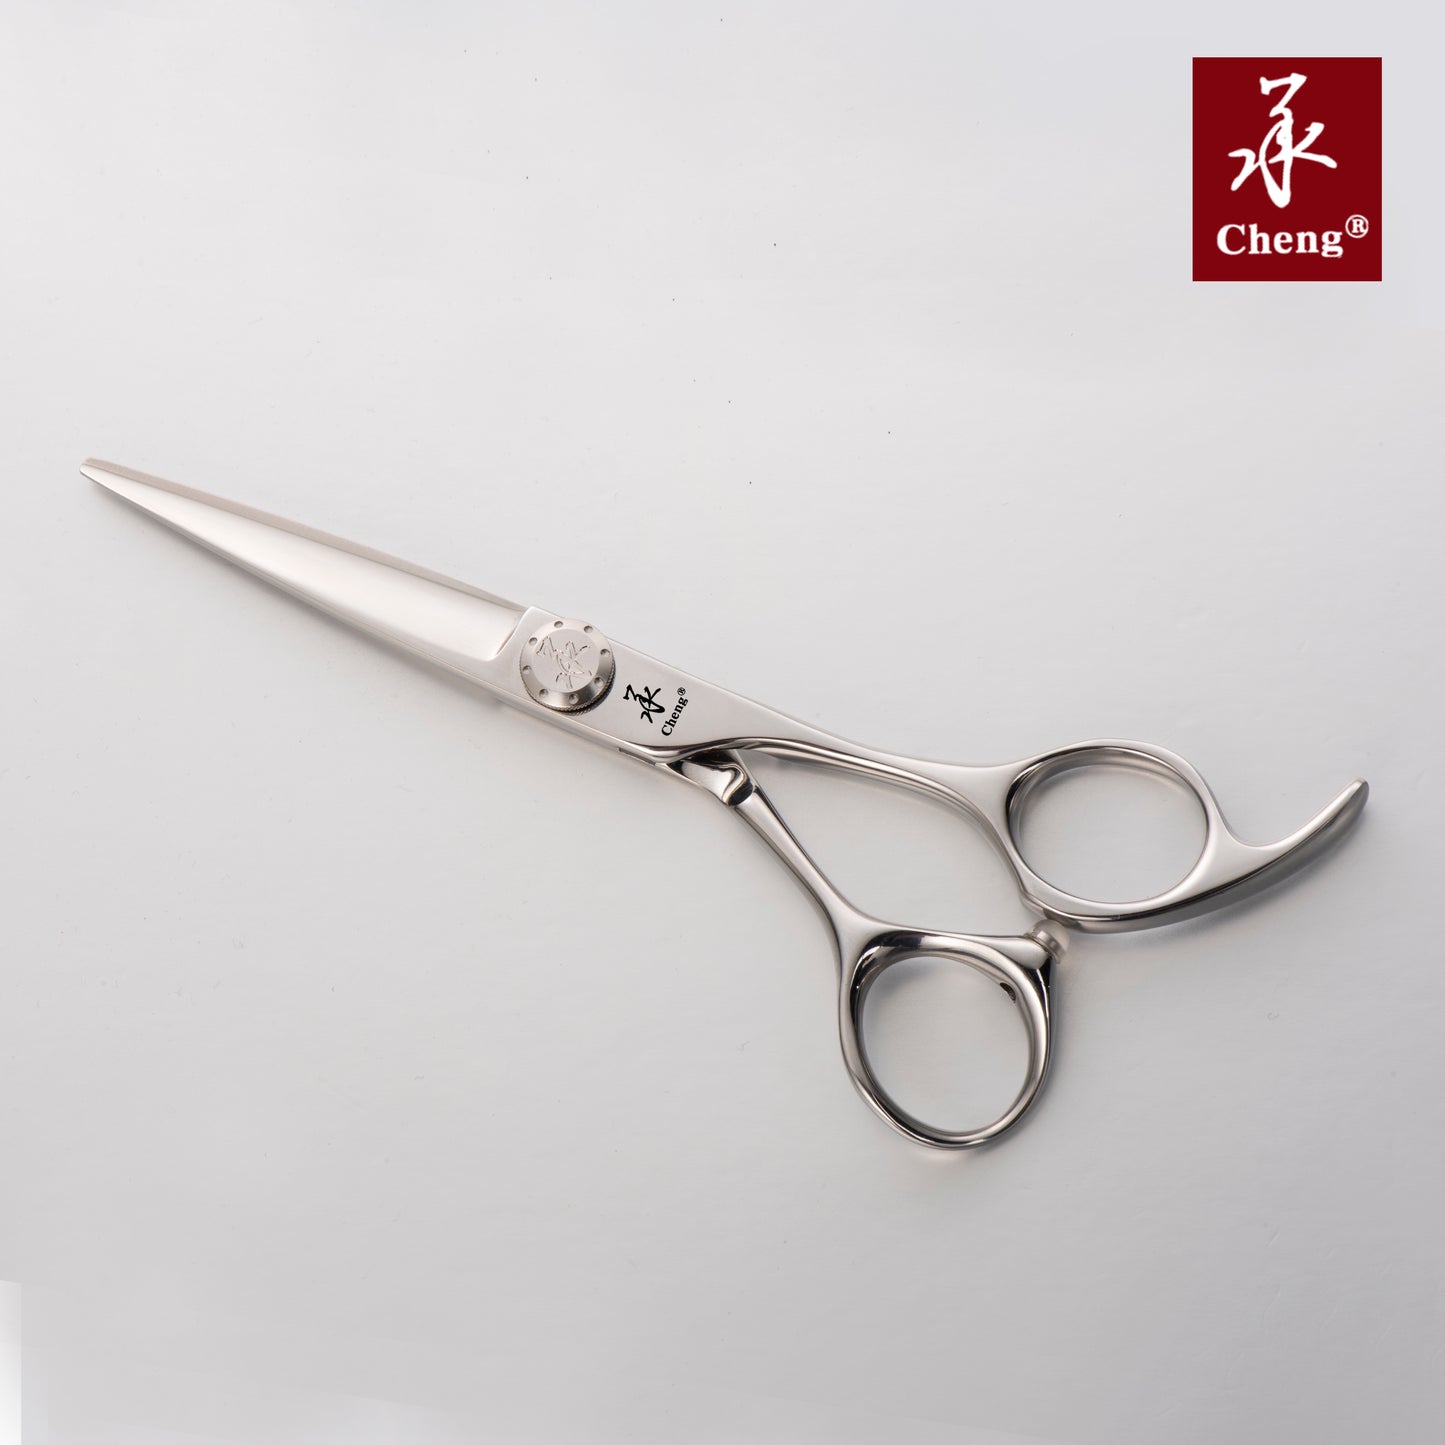 UA-614TZS Hair Thinning Scissors Cutting 6"14T Stainless Steel About=35%